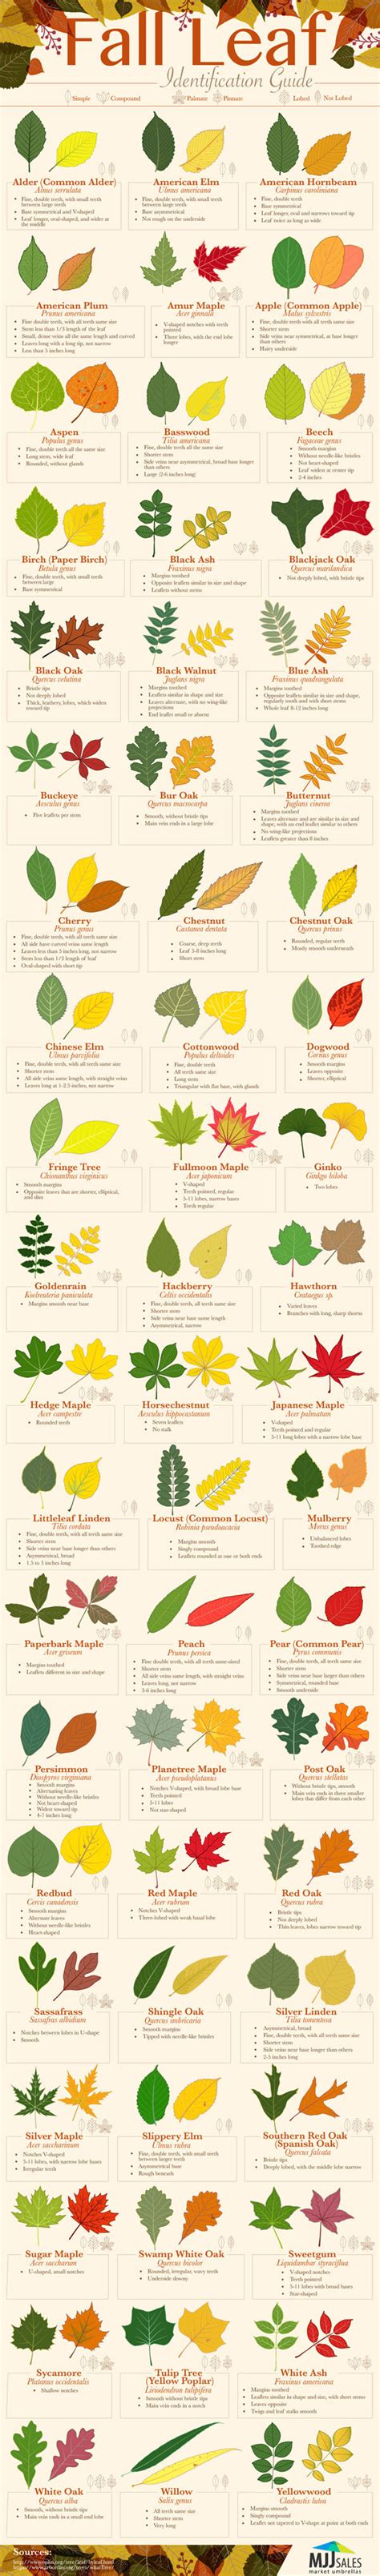 Fall Leaf Identification Guide Infographic Greenpal